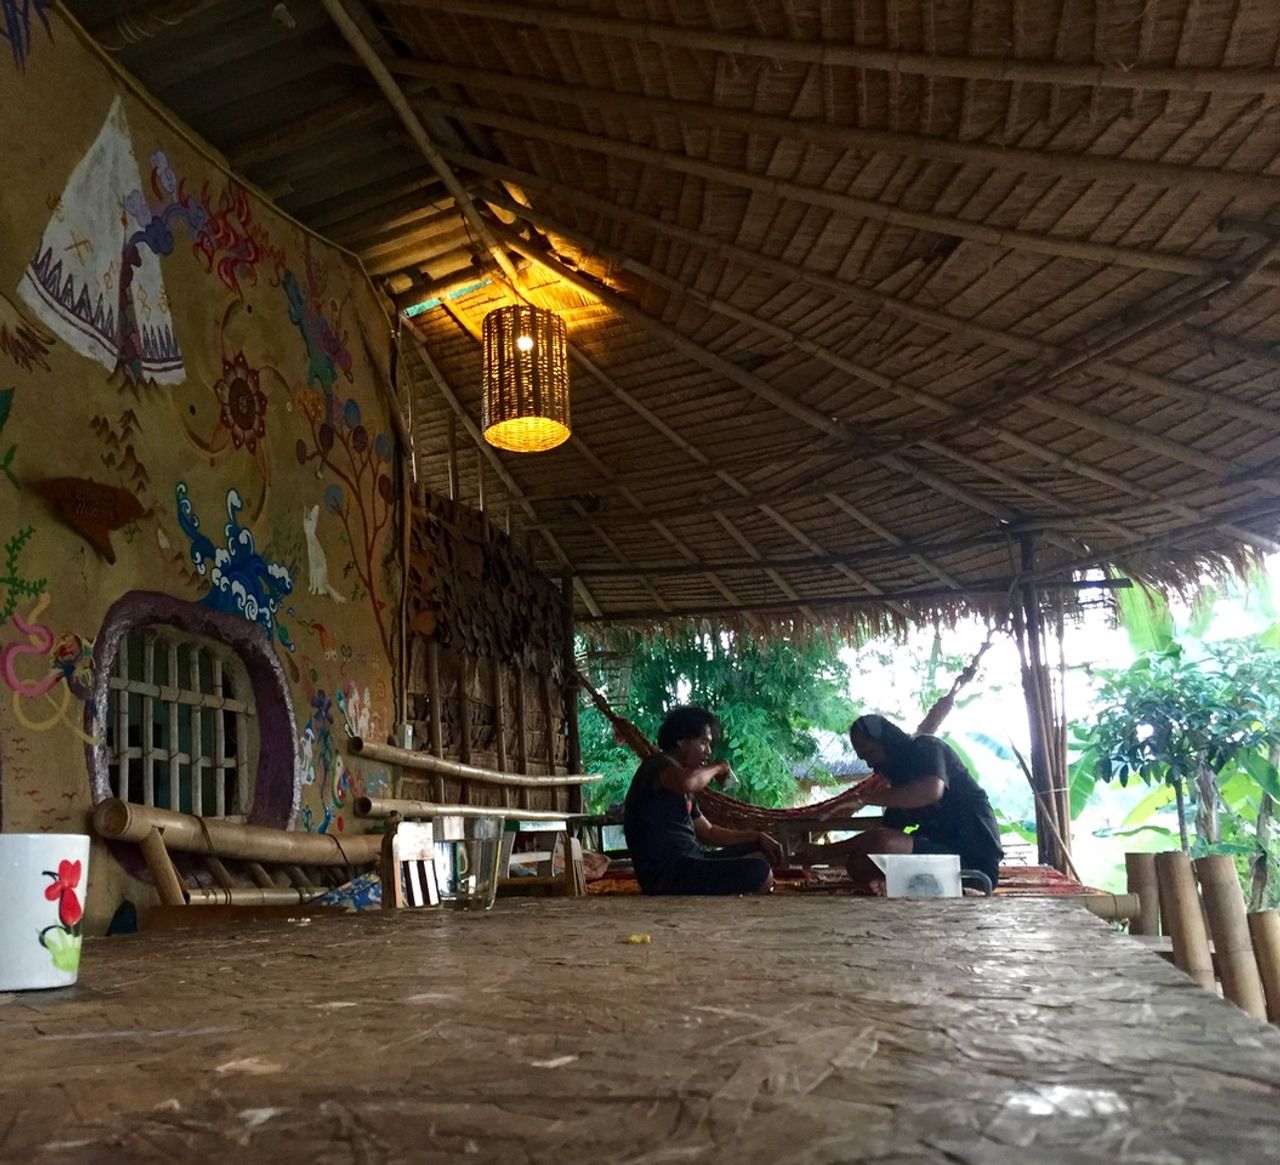 Two people playing music under a hut.